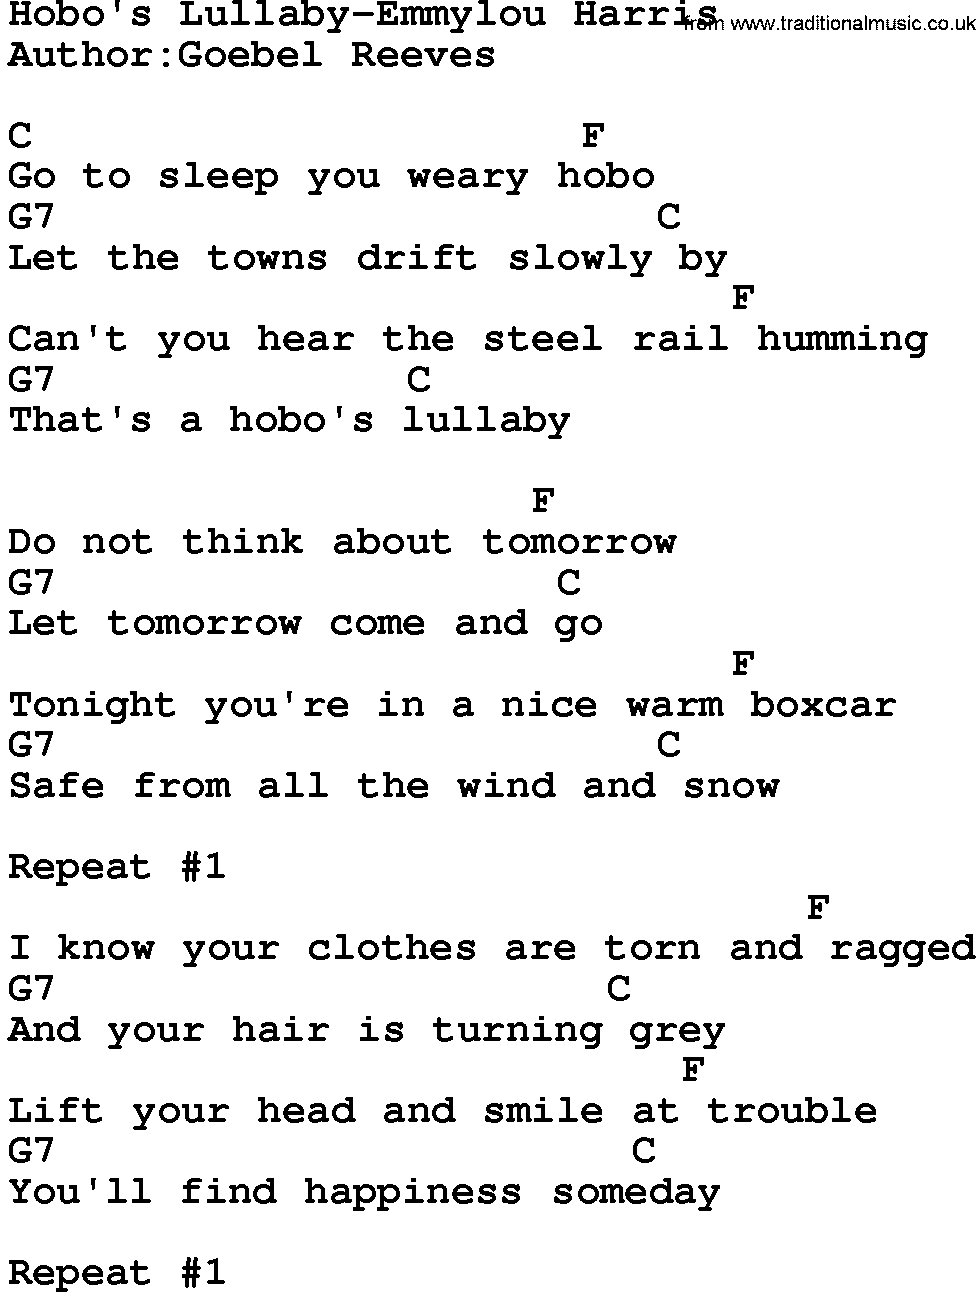 Country music song: Hobo's Lullaby-Emmylou Harris lyrics and chords